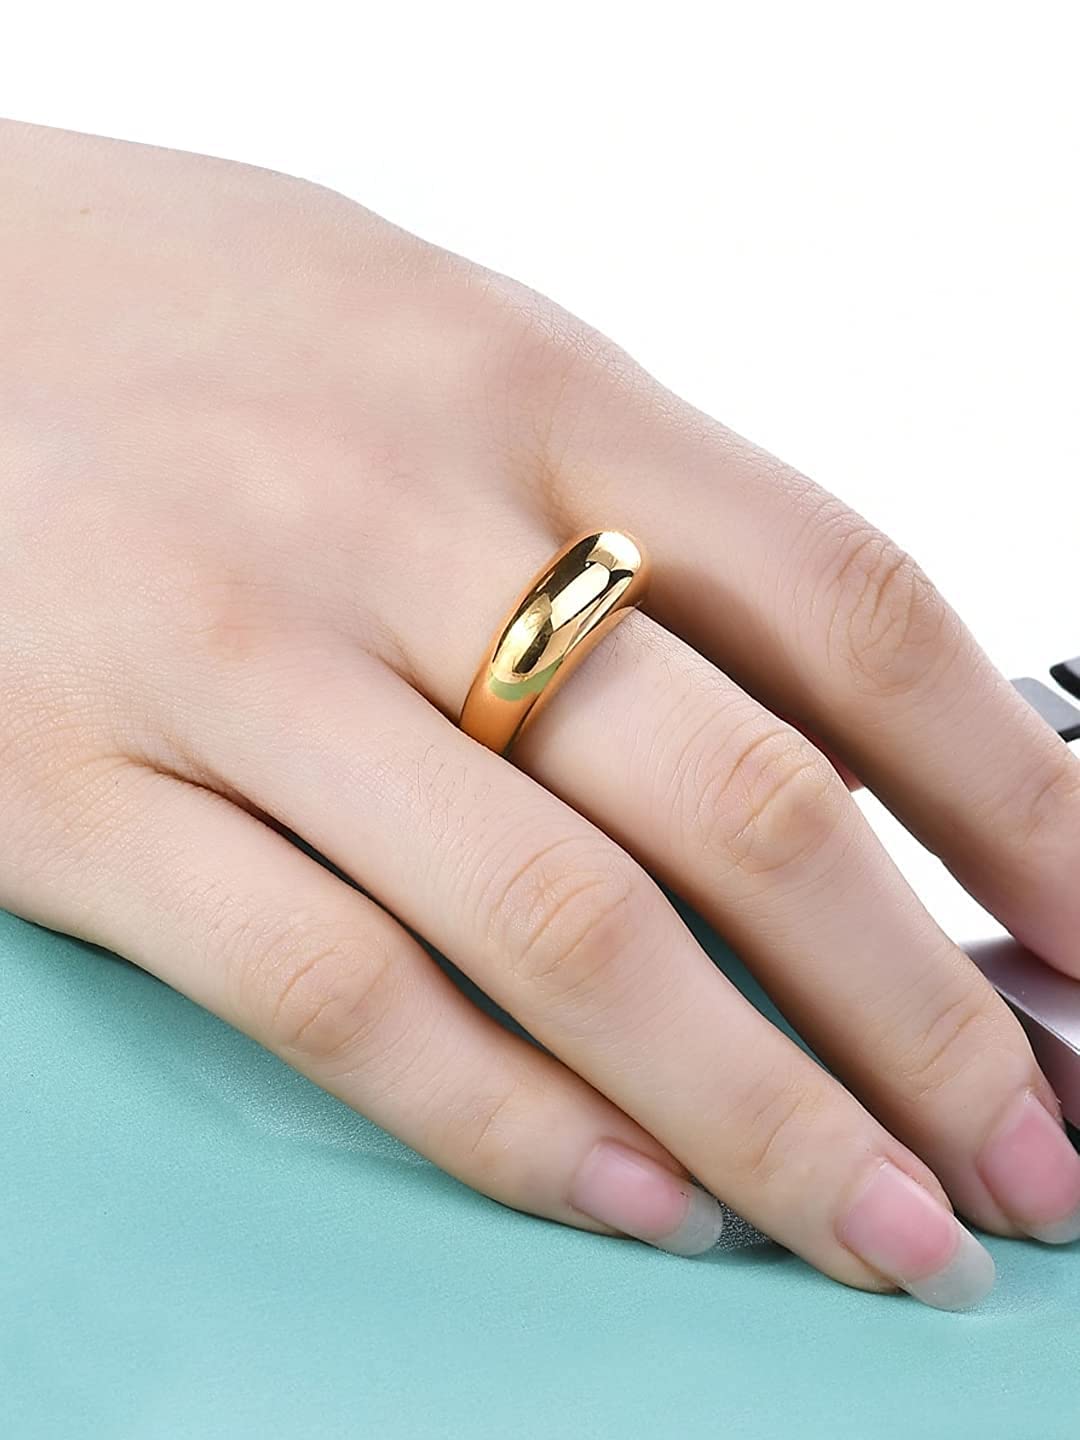 Jewelry Accessories | Finger Rings - Finger Rings Women Gold Color Anillos  Fashion - Aliexpress